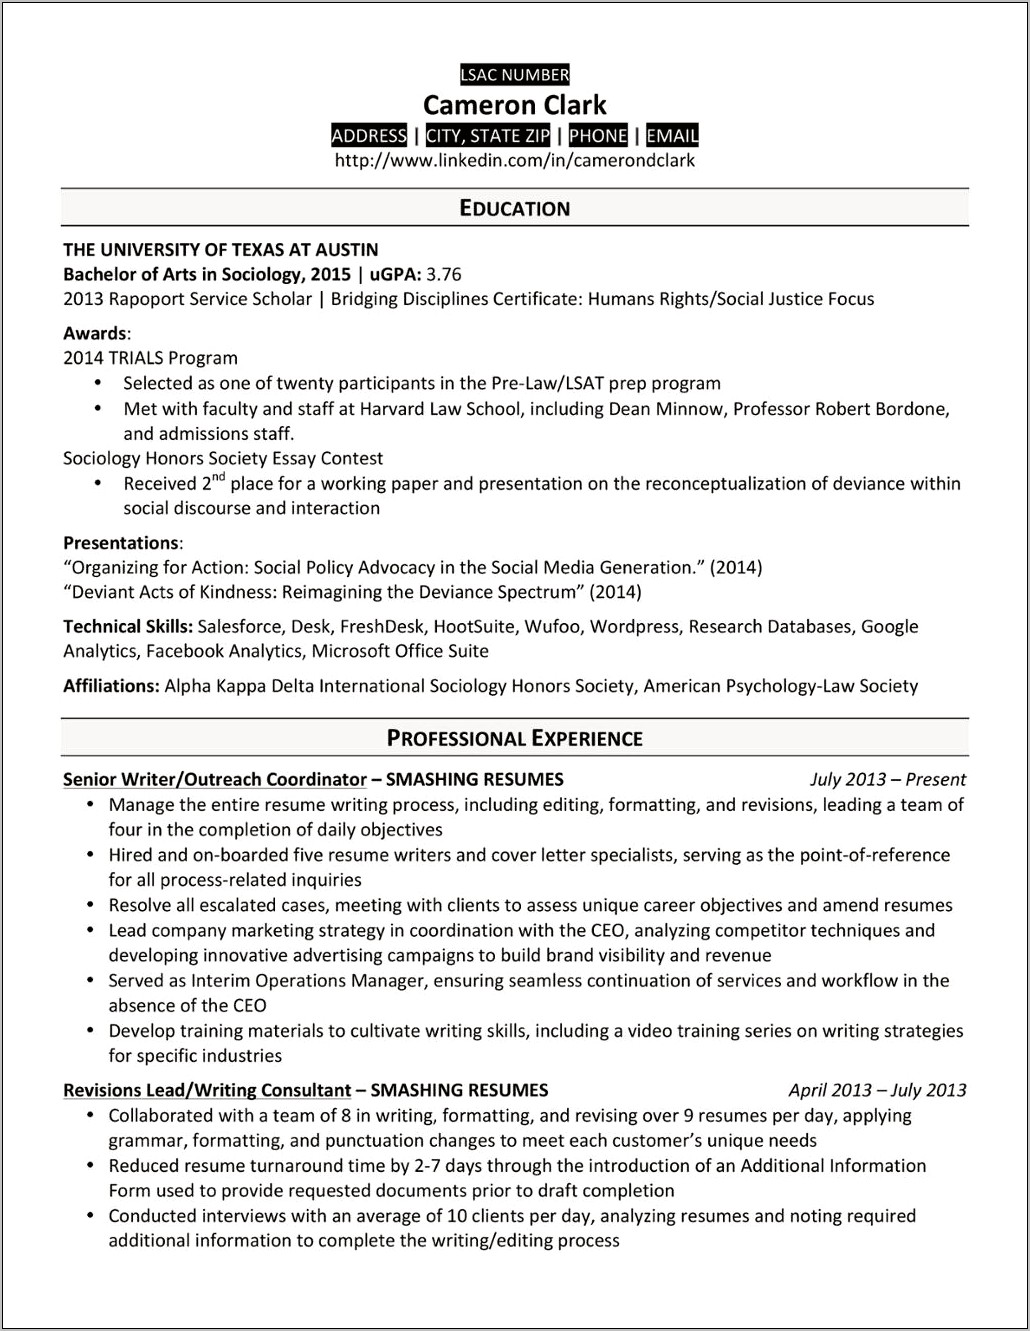 Resume Format For Democracy And Governance Jobs